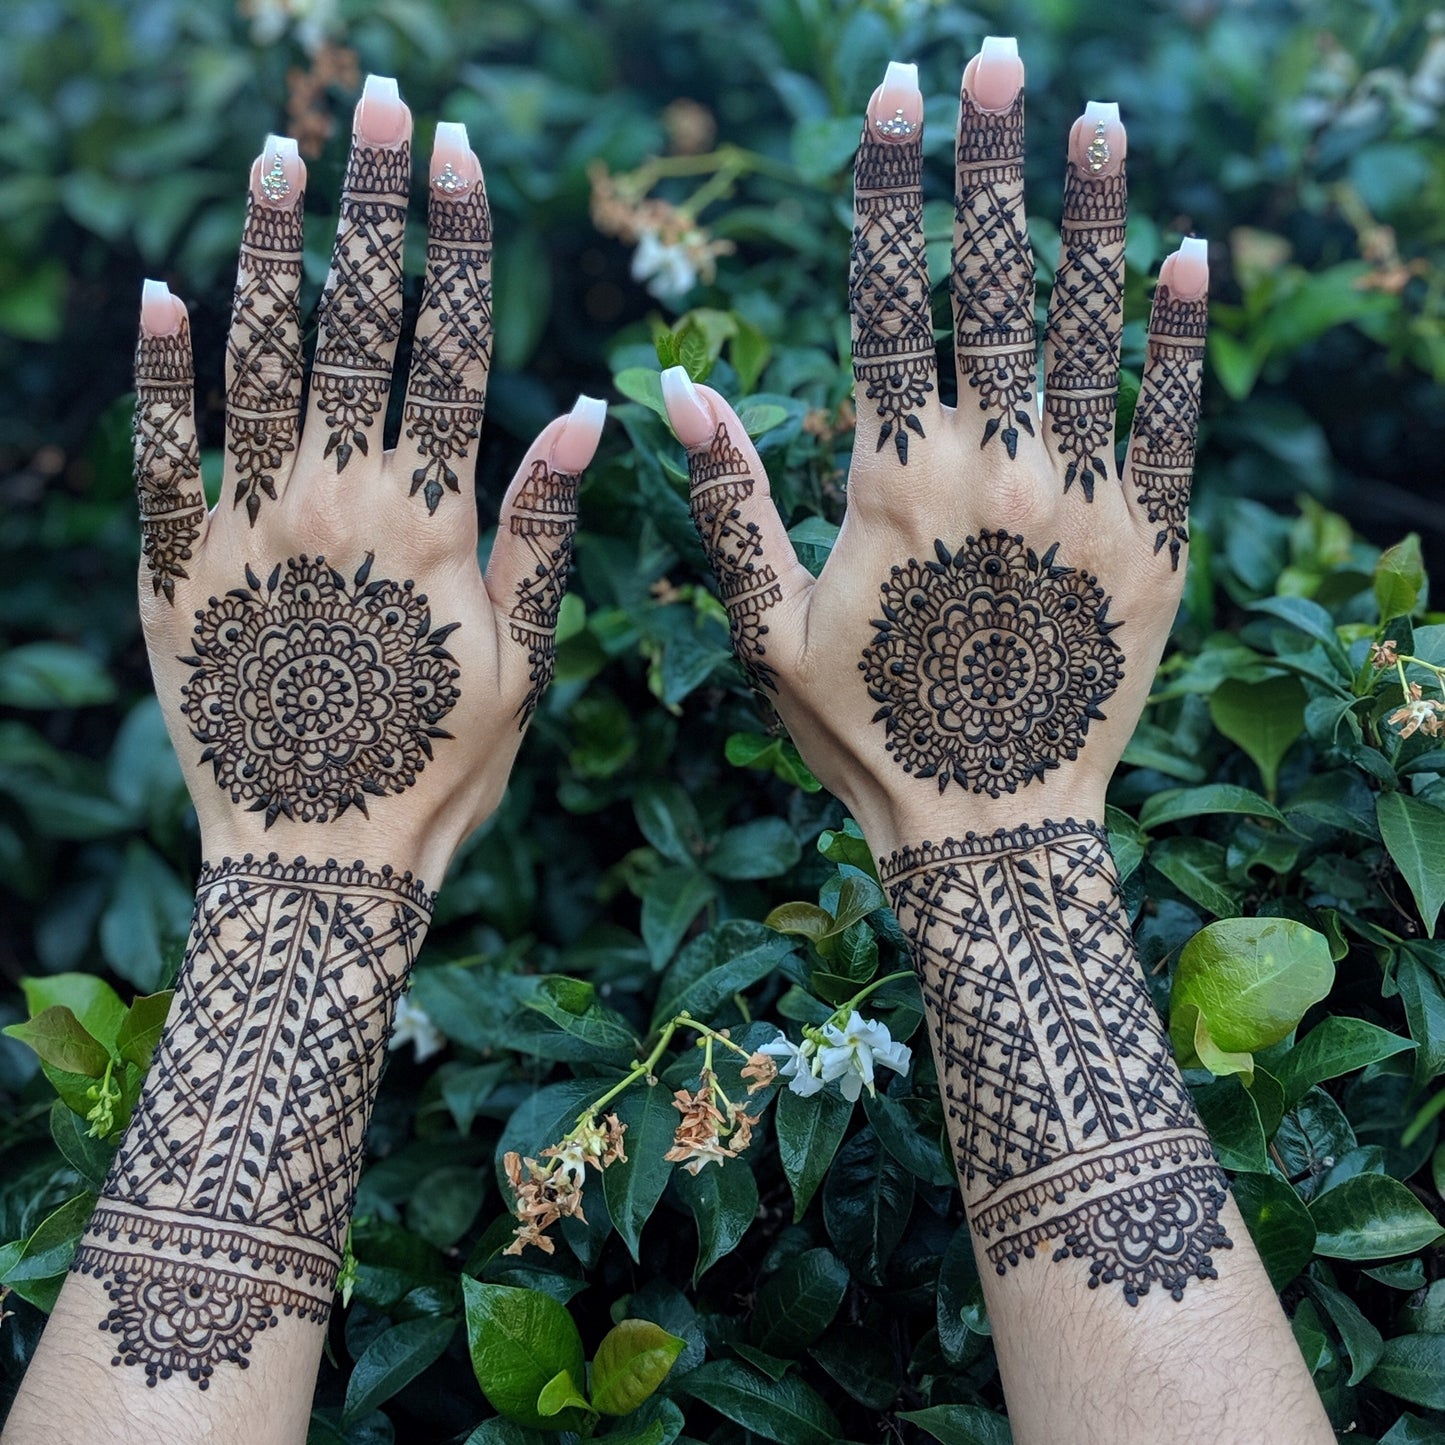 DIY Henna Kit | Makes up to 5 Henna Cones and Inlcudes Aftercare Balm, Sealant, Designs & Instructions